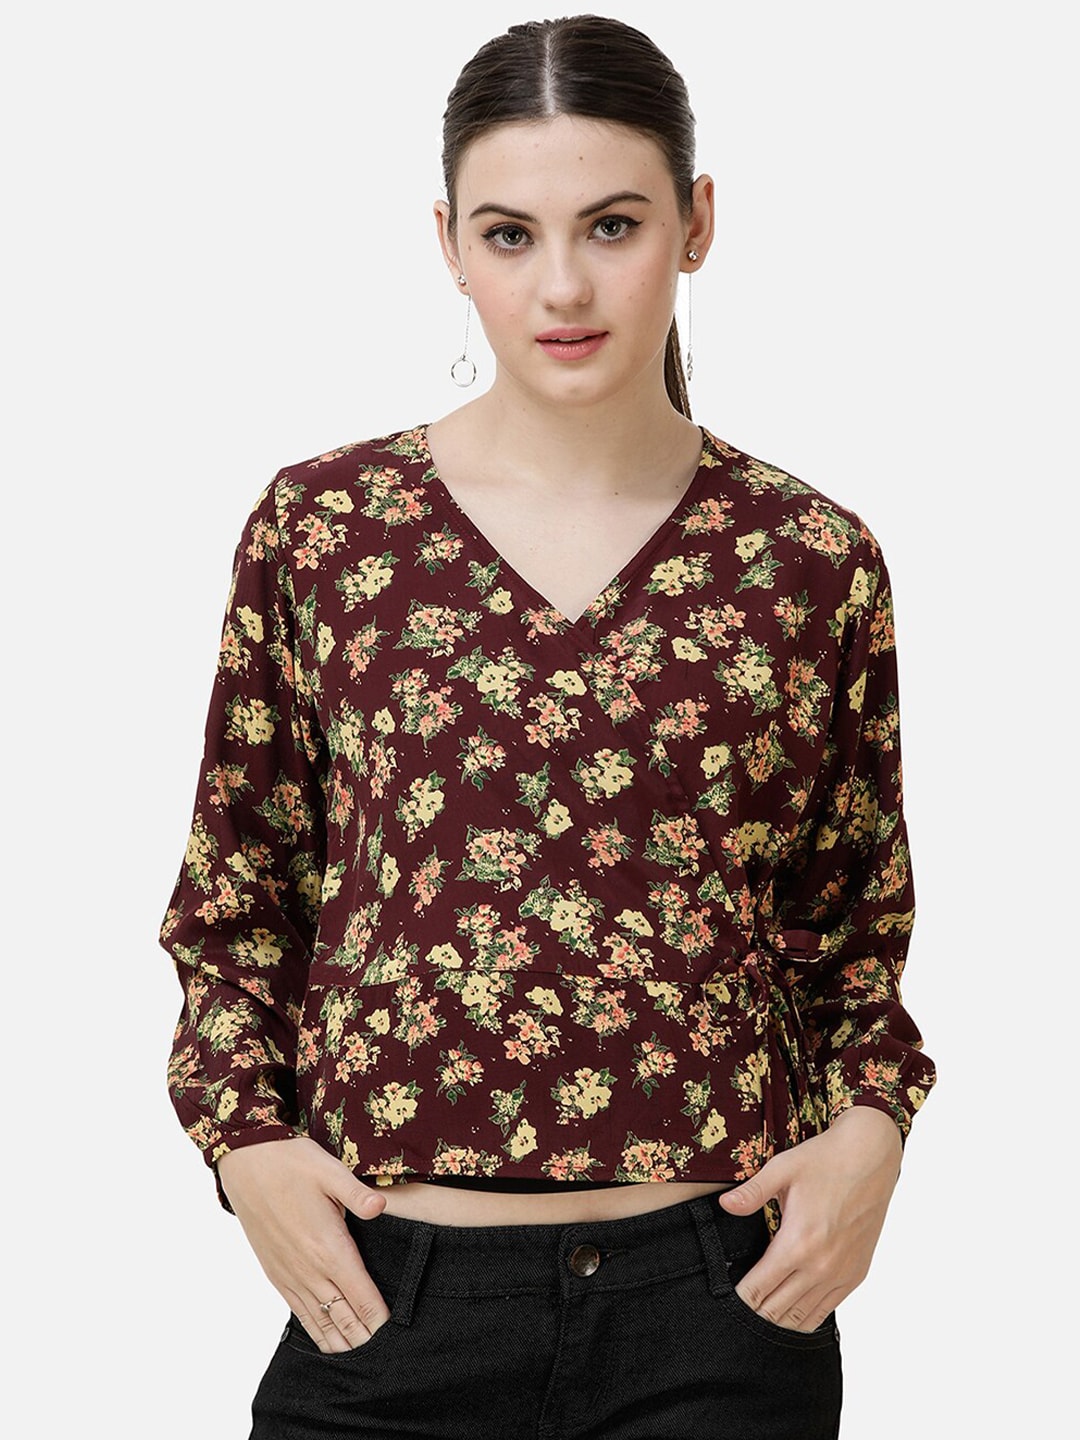 DECHEN  Floral Print Casual Top Price in India